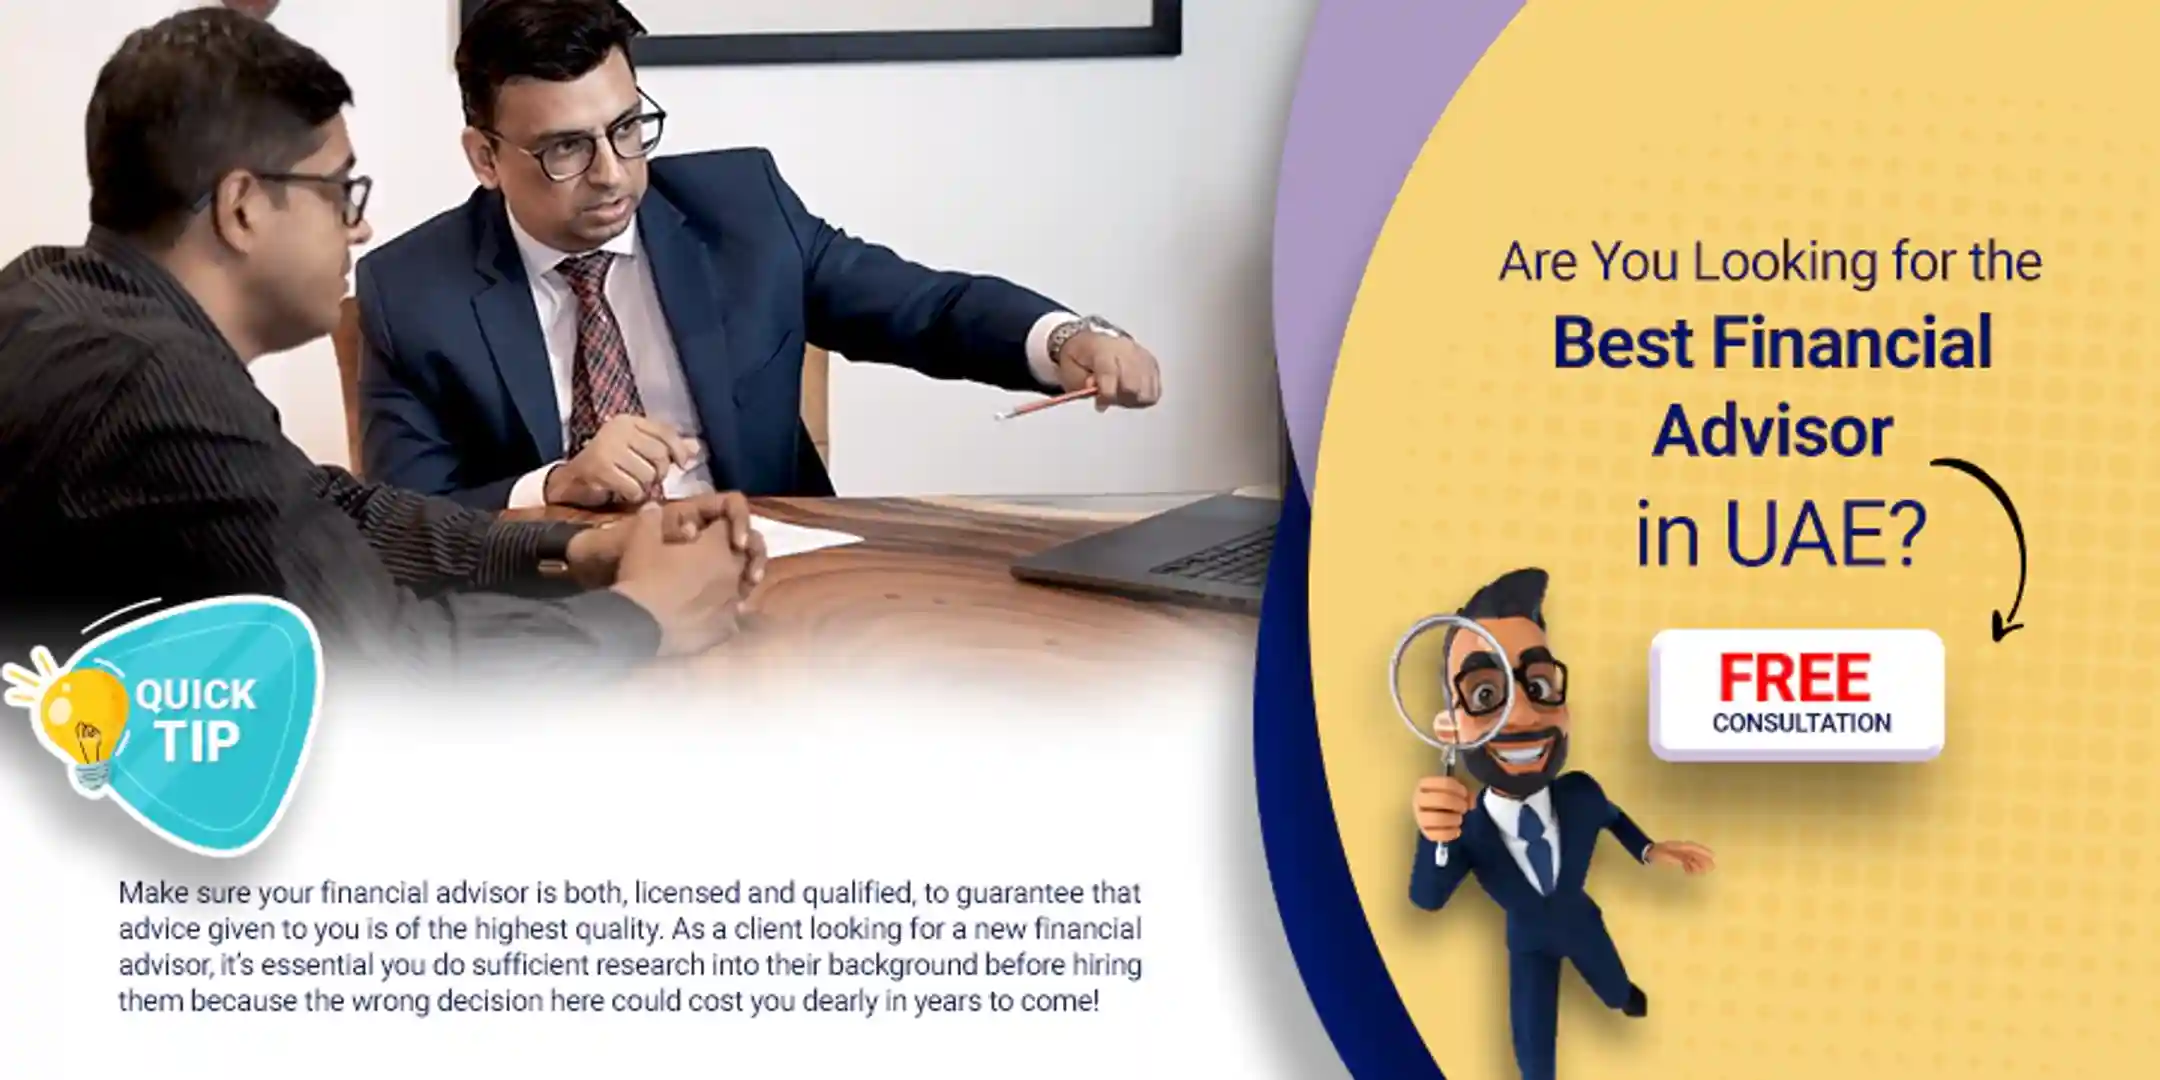 Looking for the best Financial Advisor in UAE